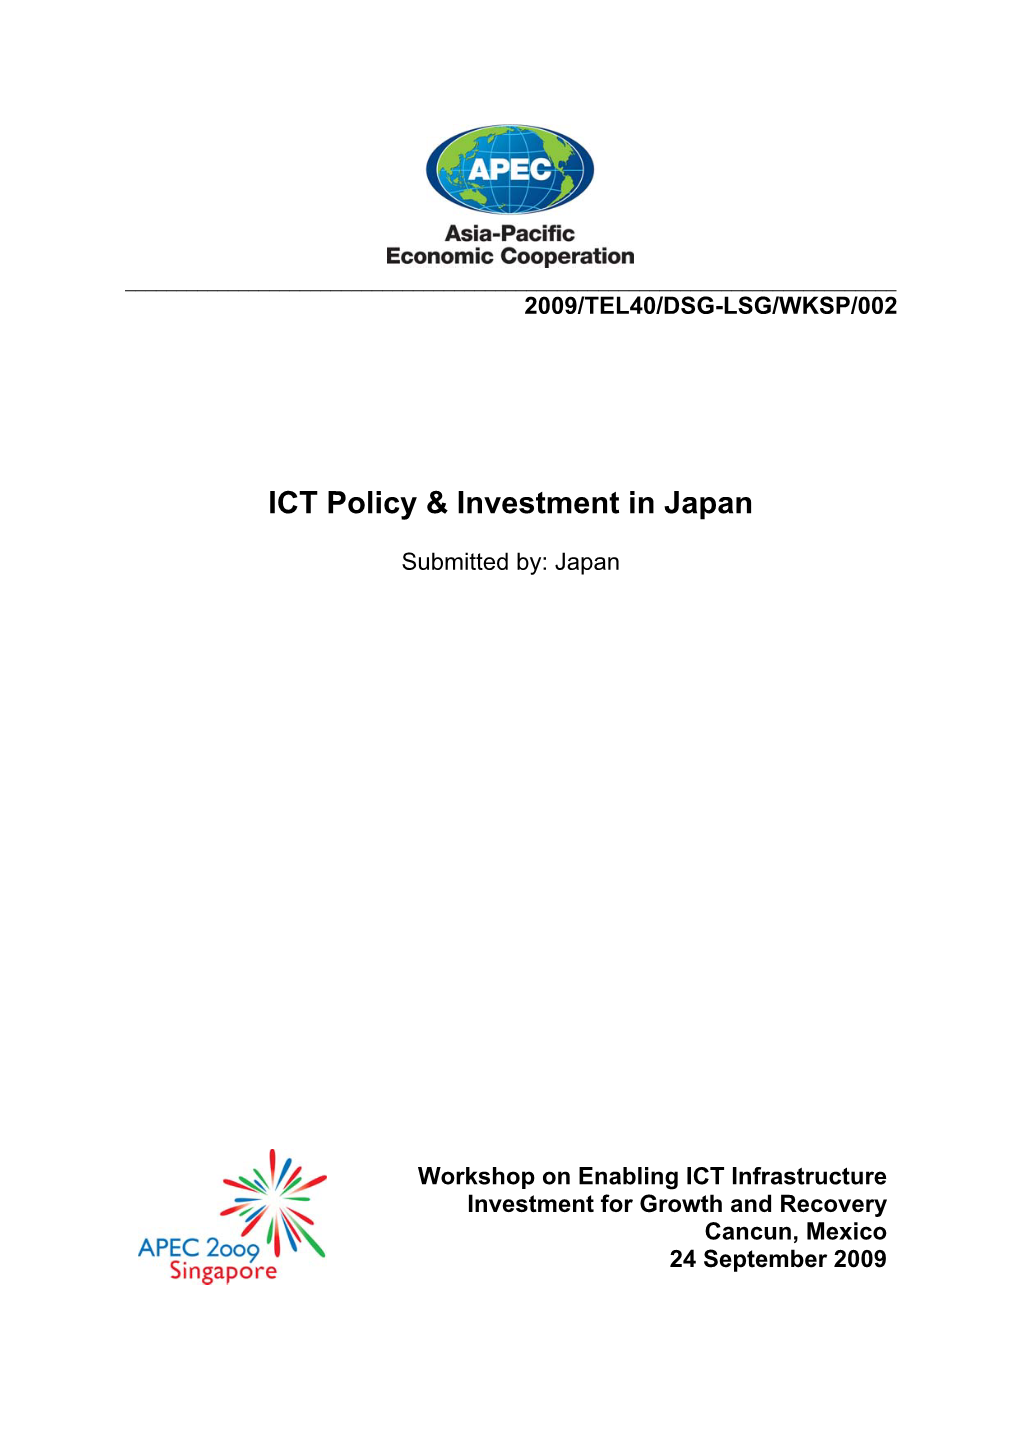 ICT Policy & Investment in Japan